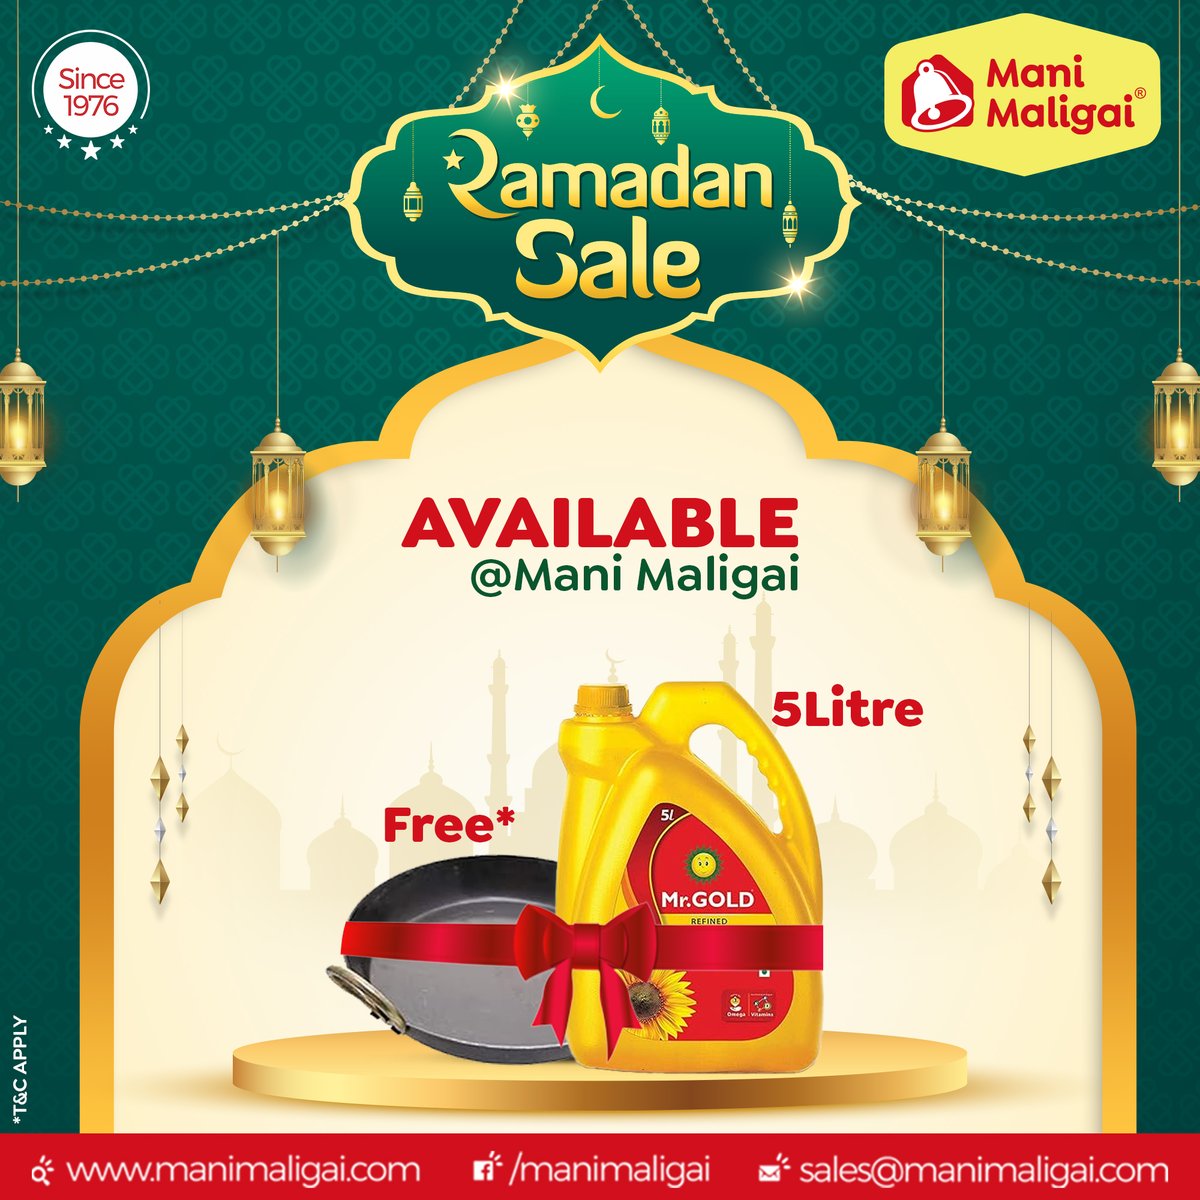 Ramzan Special Offer alert at Mani Maligai Super Market! Purchase 5 Litres of Mr. Gold Sunflower Oil and receive a FREE tawa! 📞99924 99924 linkto.contact/MM-WA manimaligai.com #Manimaligai #Pollachi #Supermarket #RamalanSpecial #RamalanSale #mrgoldoil #Sunfloweroil